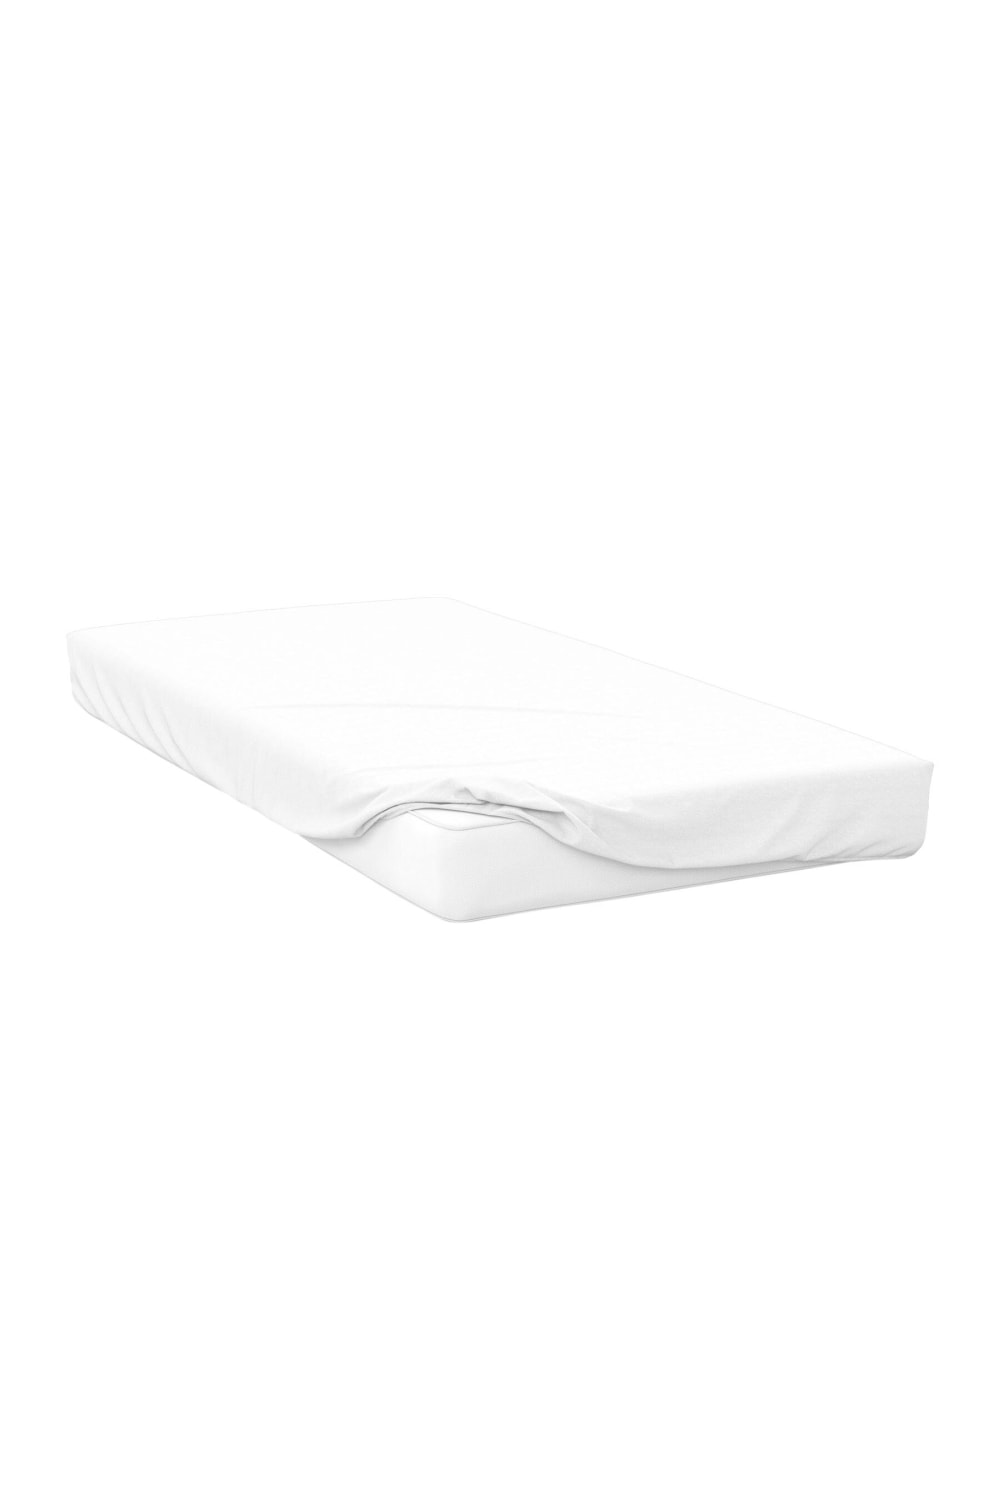 Belledorm 400 Thread Count Egyptian Cotton Extra Deep Fitted Sheet (White) (Full) (UK - Double)